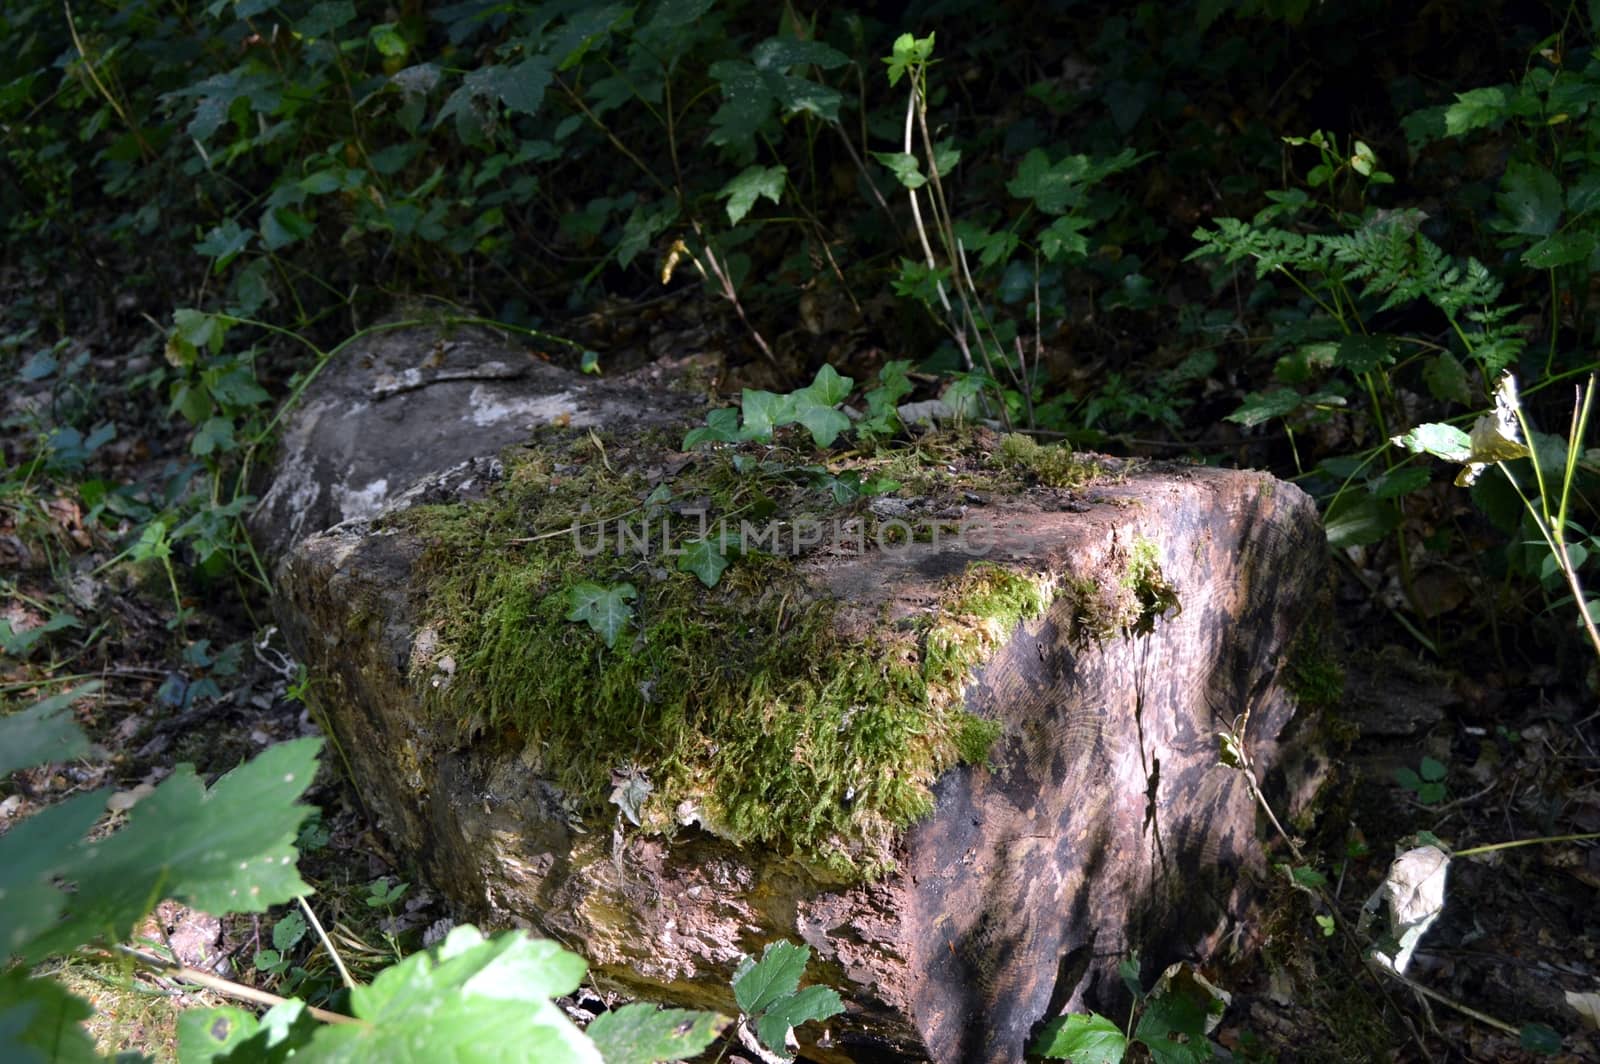 Old trunk with the foam rest along a wooden way